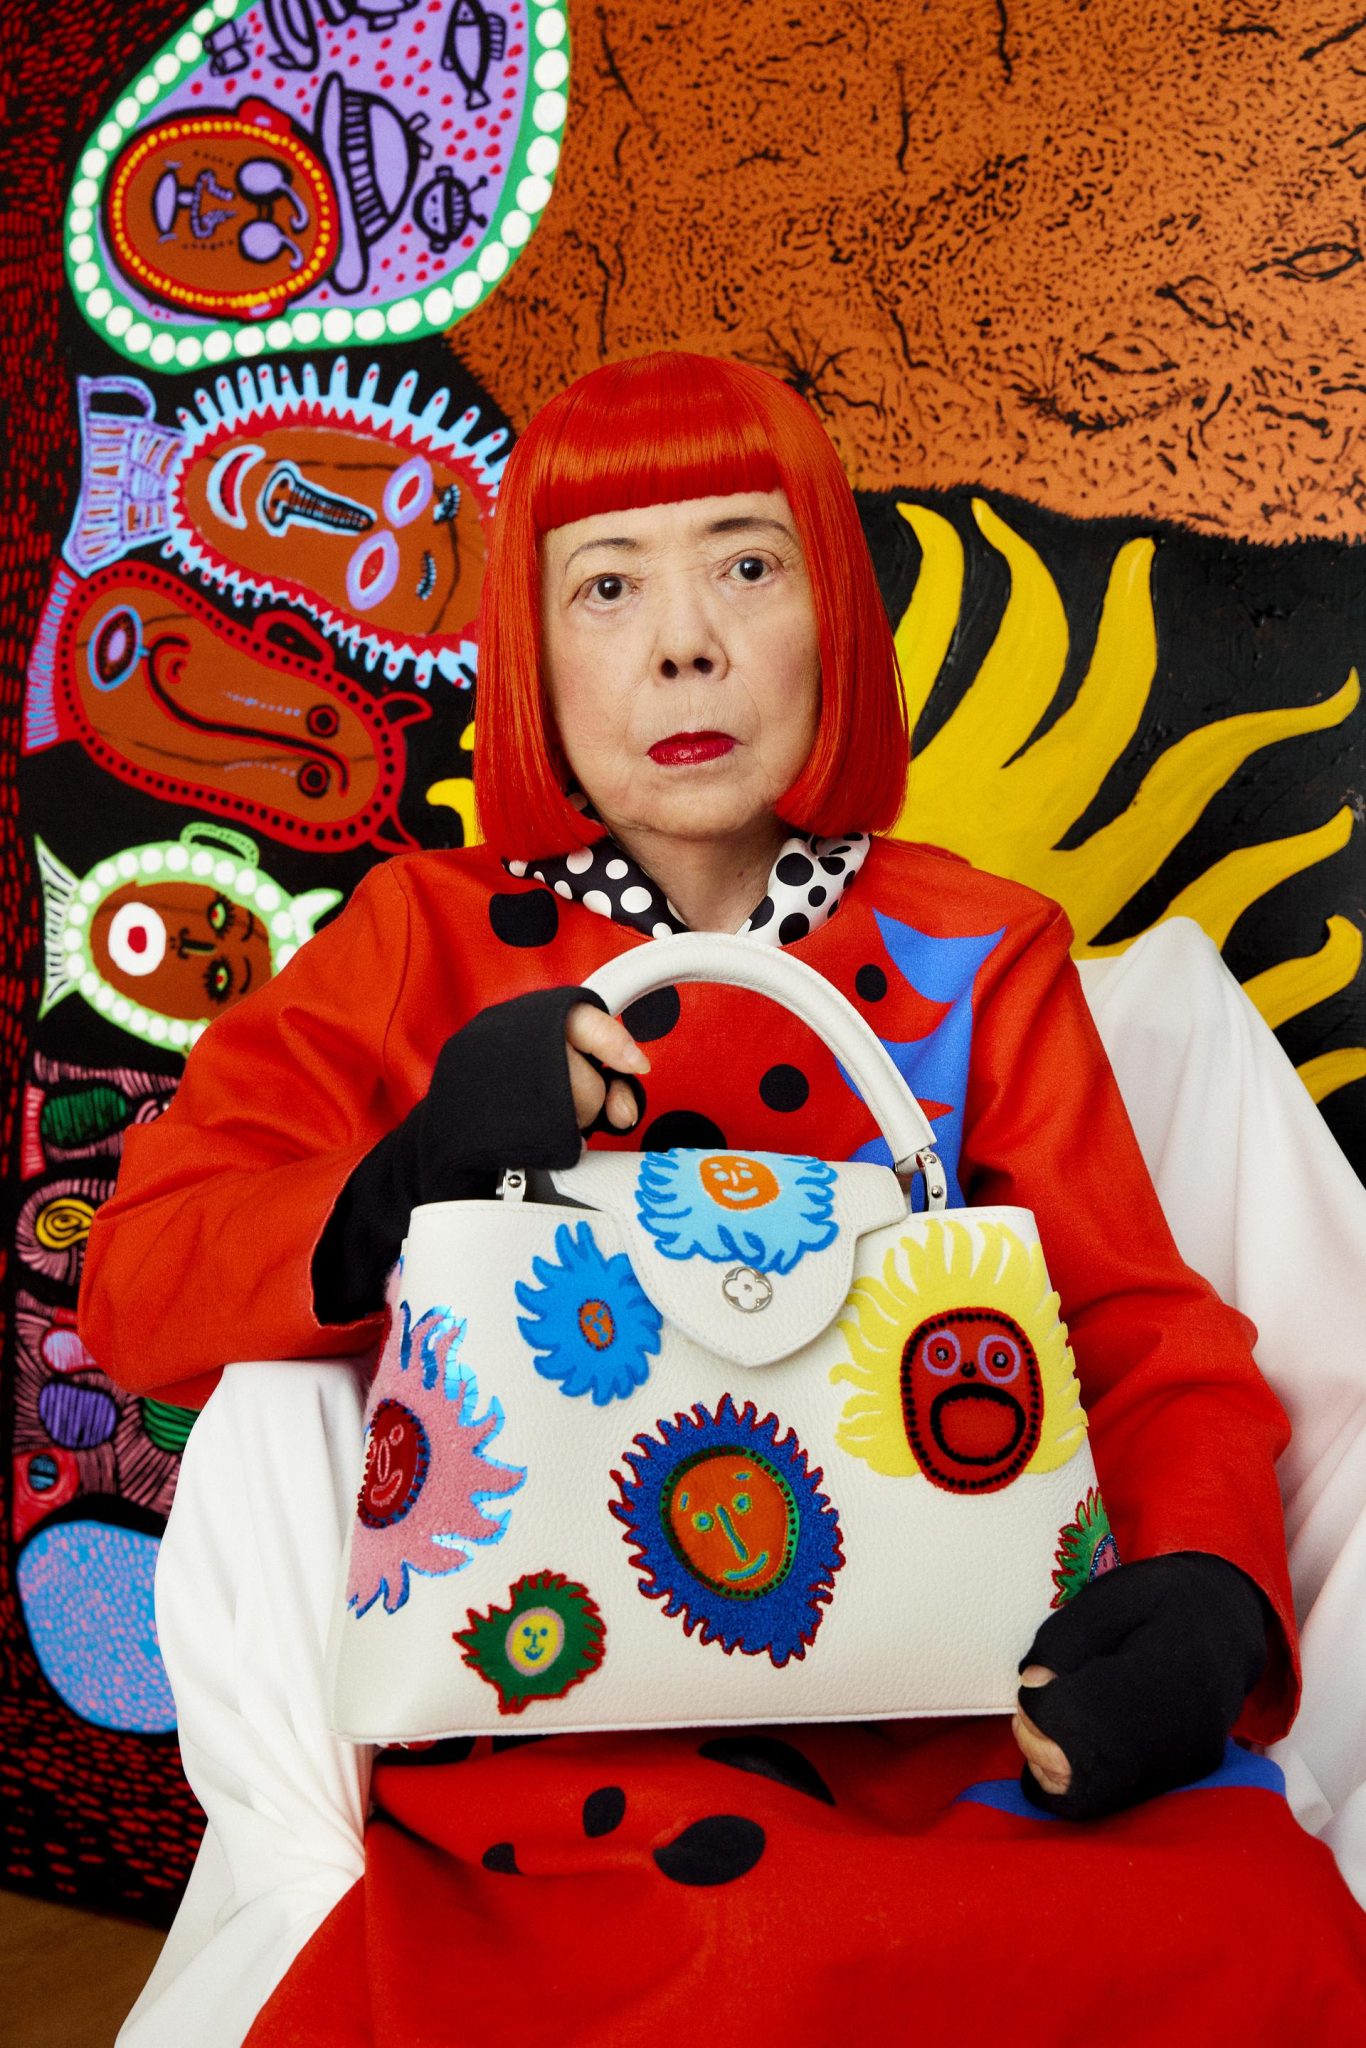 LOUIS VUITTON AND Yayoi Kusama CReATE Infinity WITH A HYPNOTIC AND